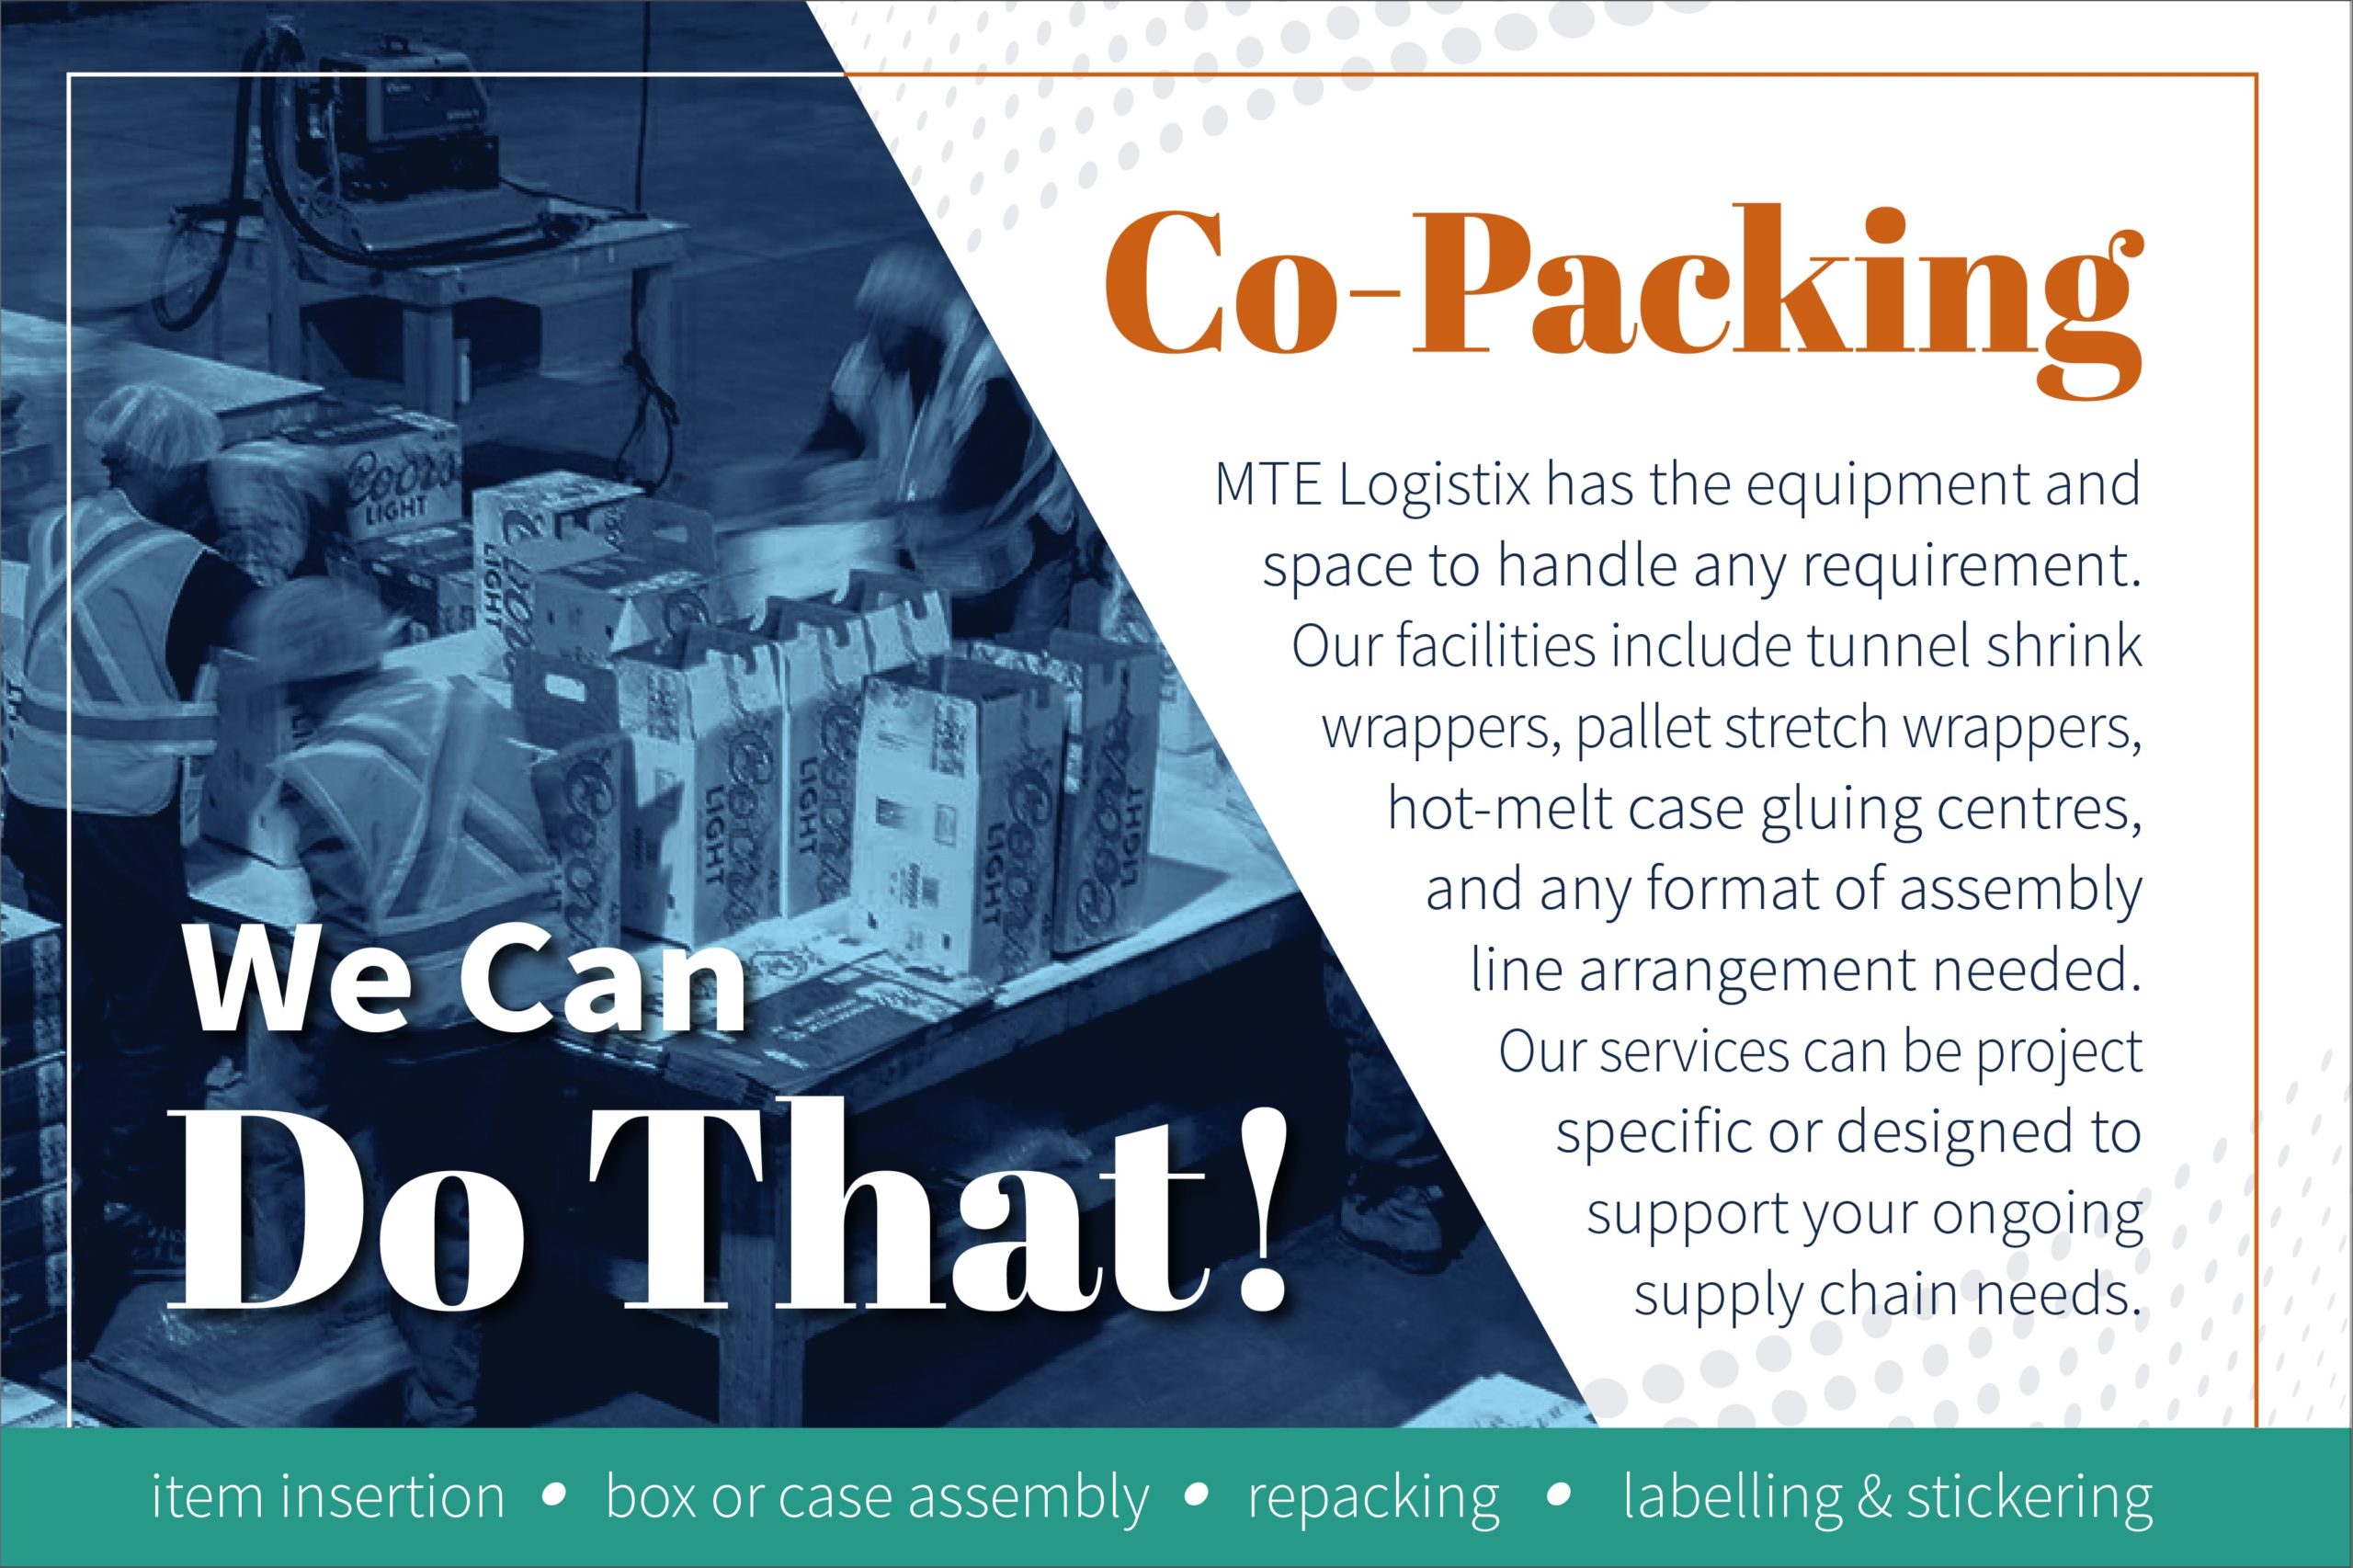 Co-Packing - We Can Do That